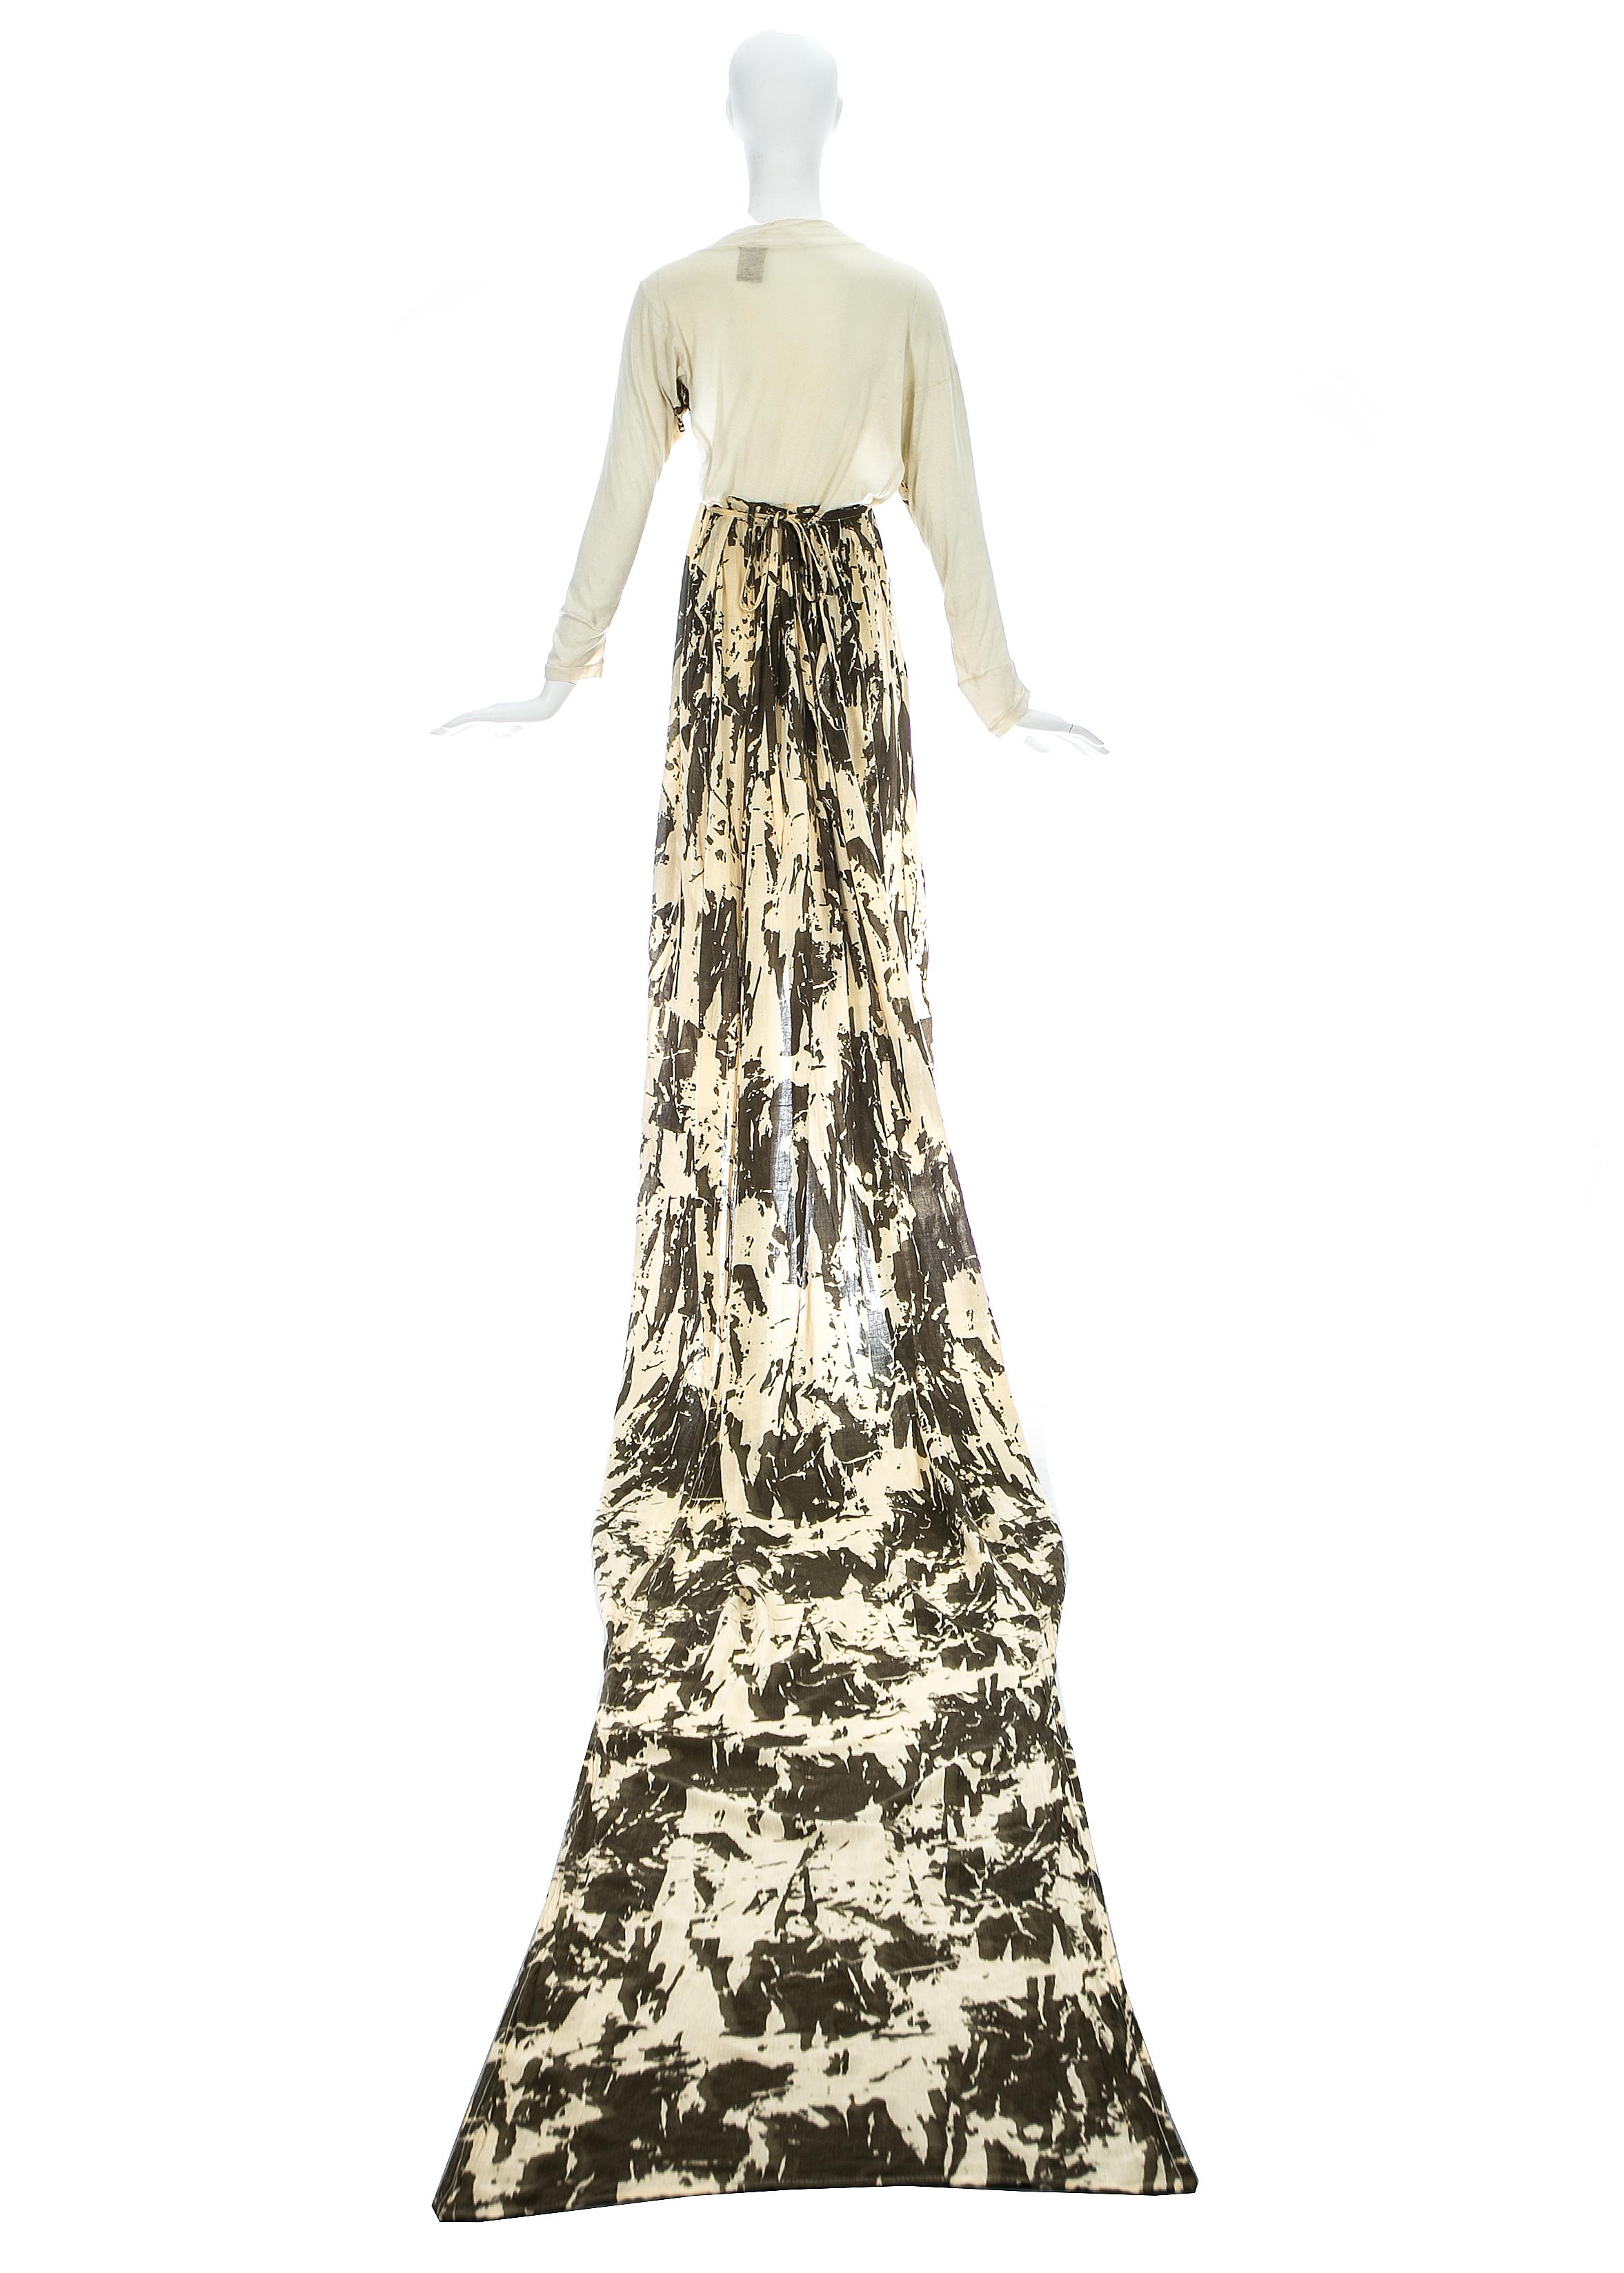 White Worlds End cream and brown acid wash toga dress with extra long train, S/S 1982 For Sale